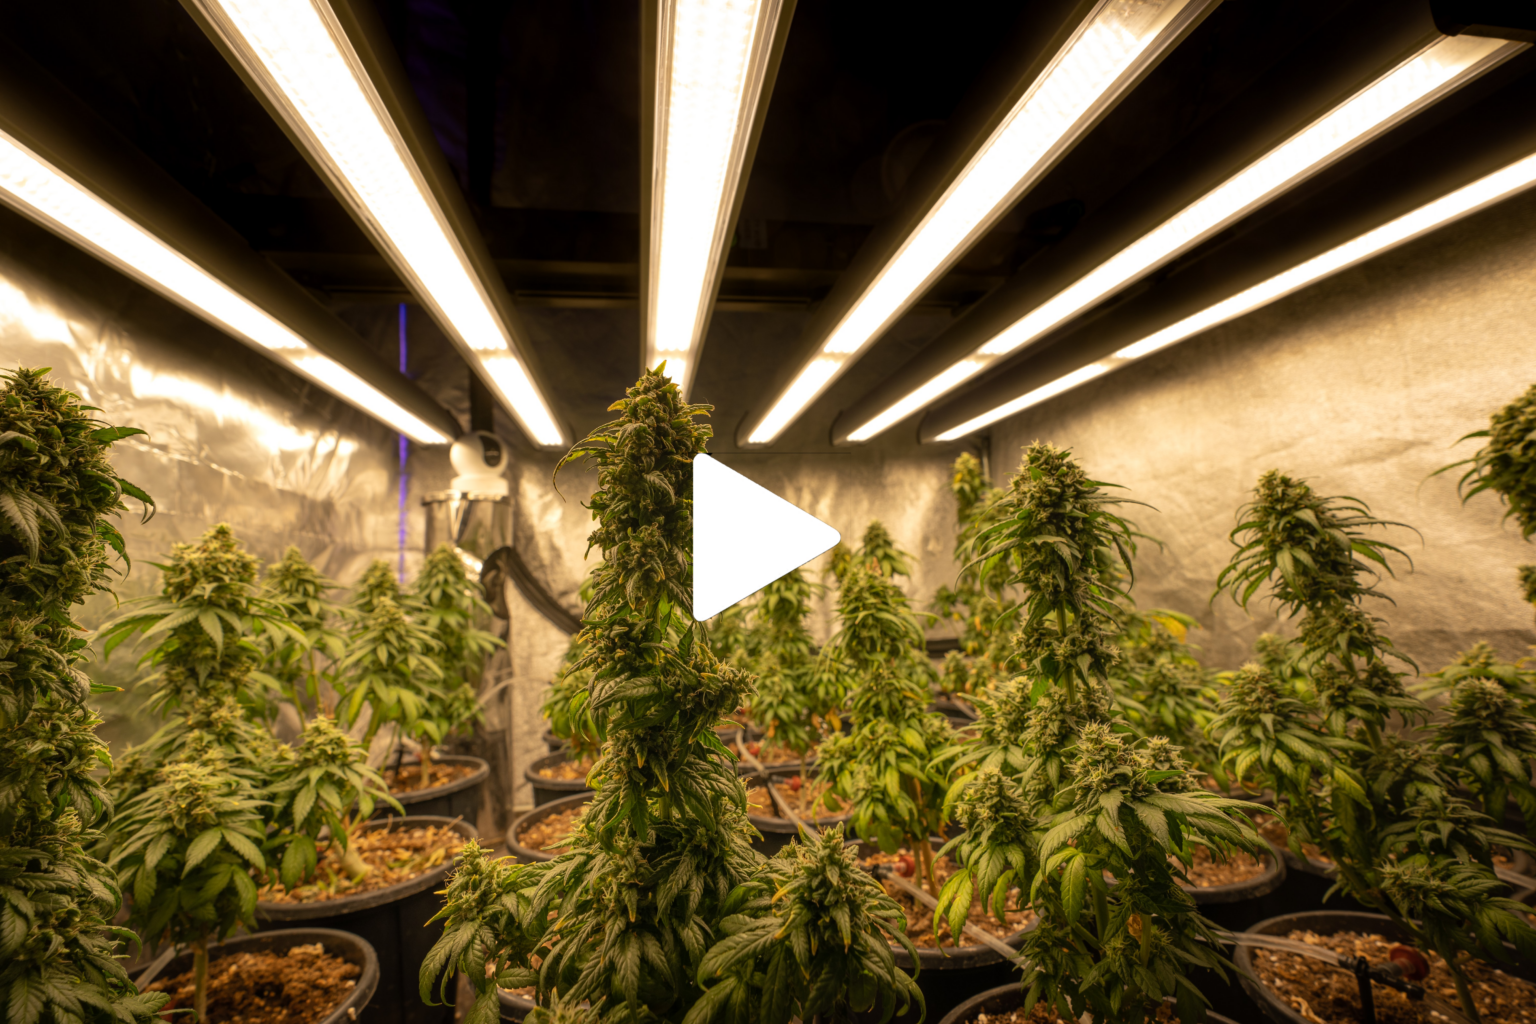 Watch Many New Businesses are coming due to Cannabis Legislation trends video on YouTube